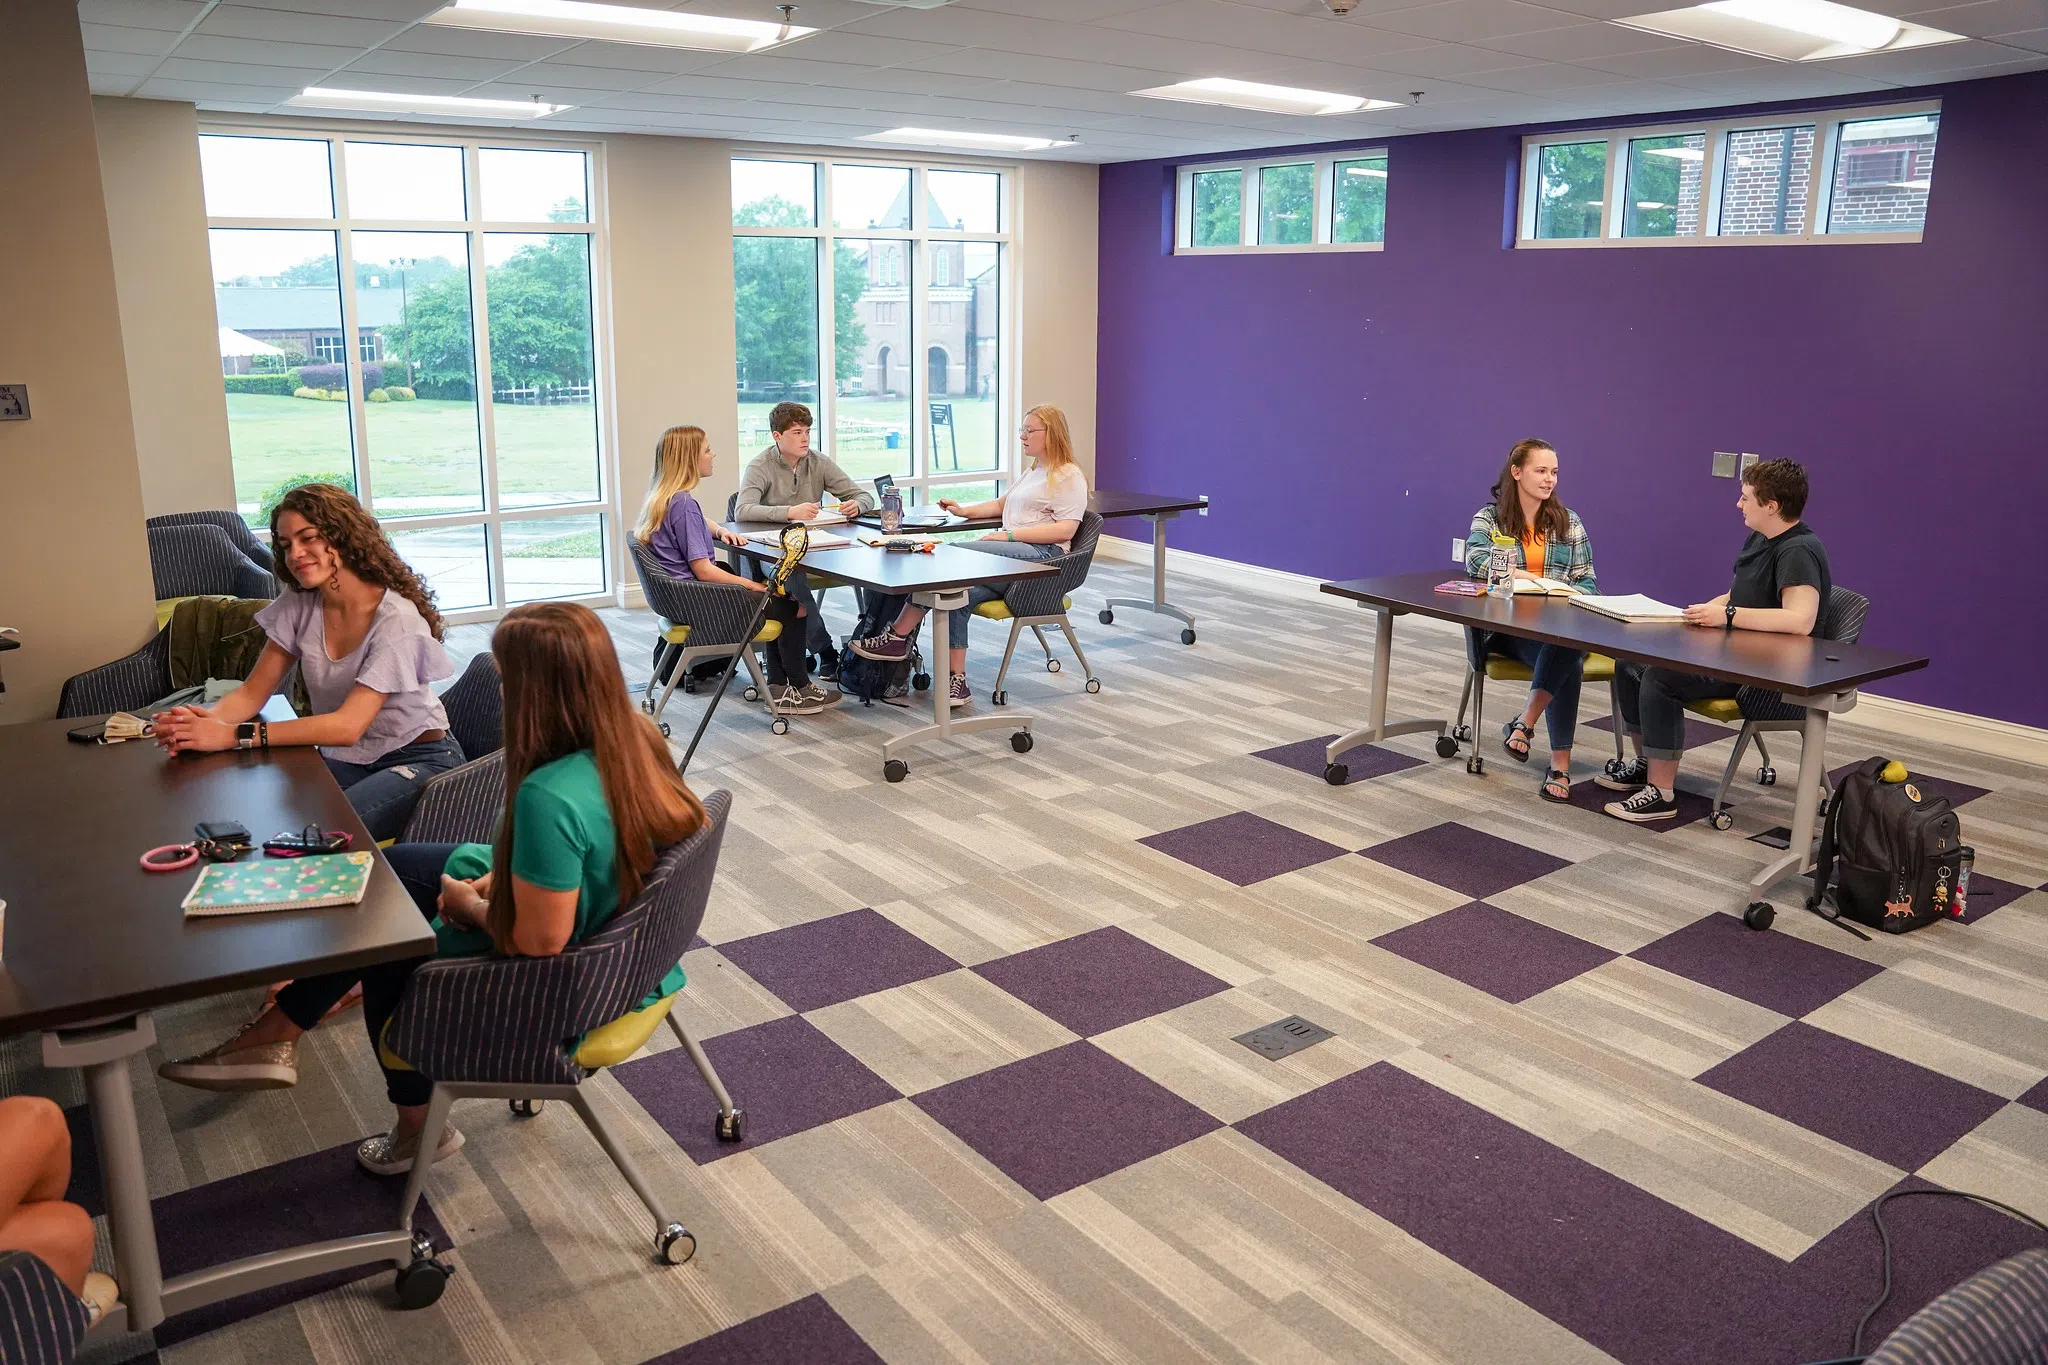 Students sit around three tables in a spacious room featuring a purple wall and windows overlooking the grassy quad.